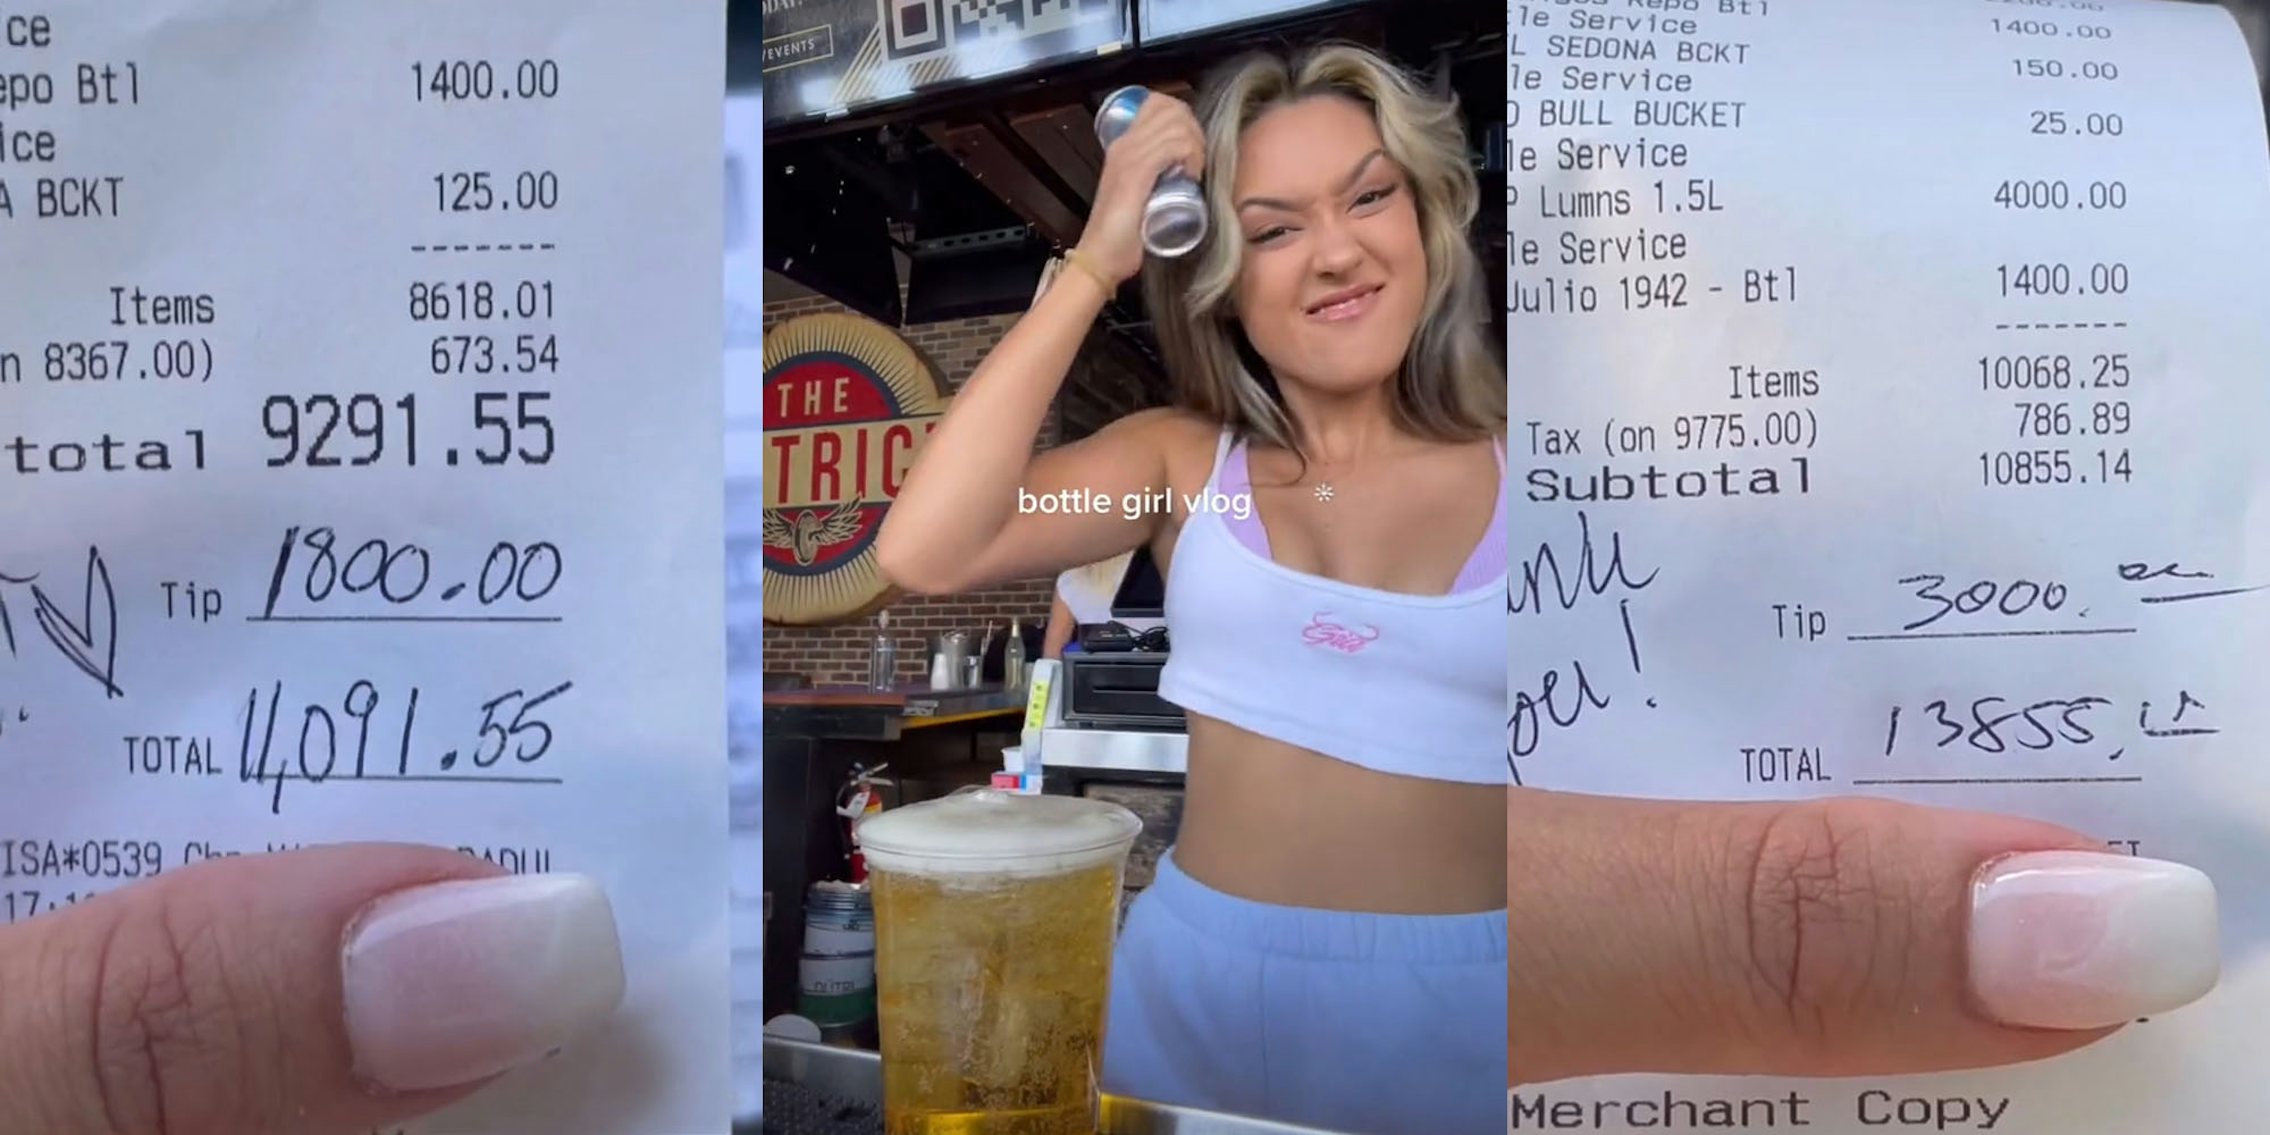 woman hand holding receipt 'Tip 1800.00' (l) woman crushing beer on head caption 'bottle girl vlog' (c) woman holding receipt 'Tip 3,000.00' (r)